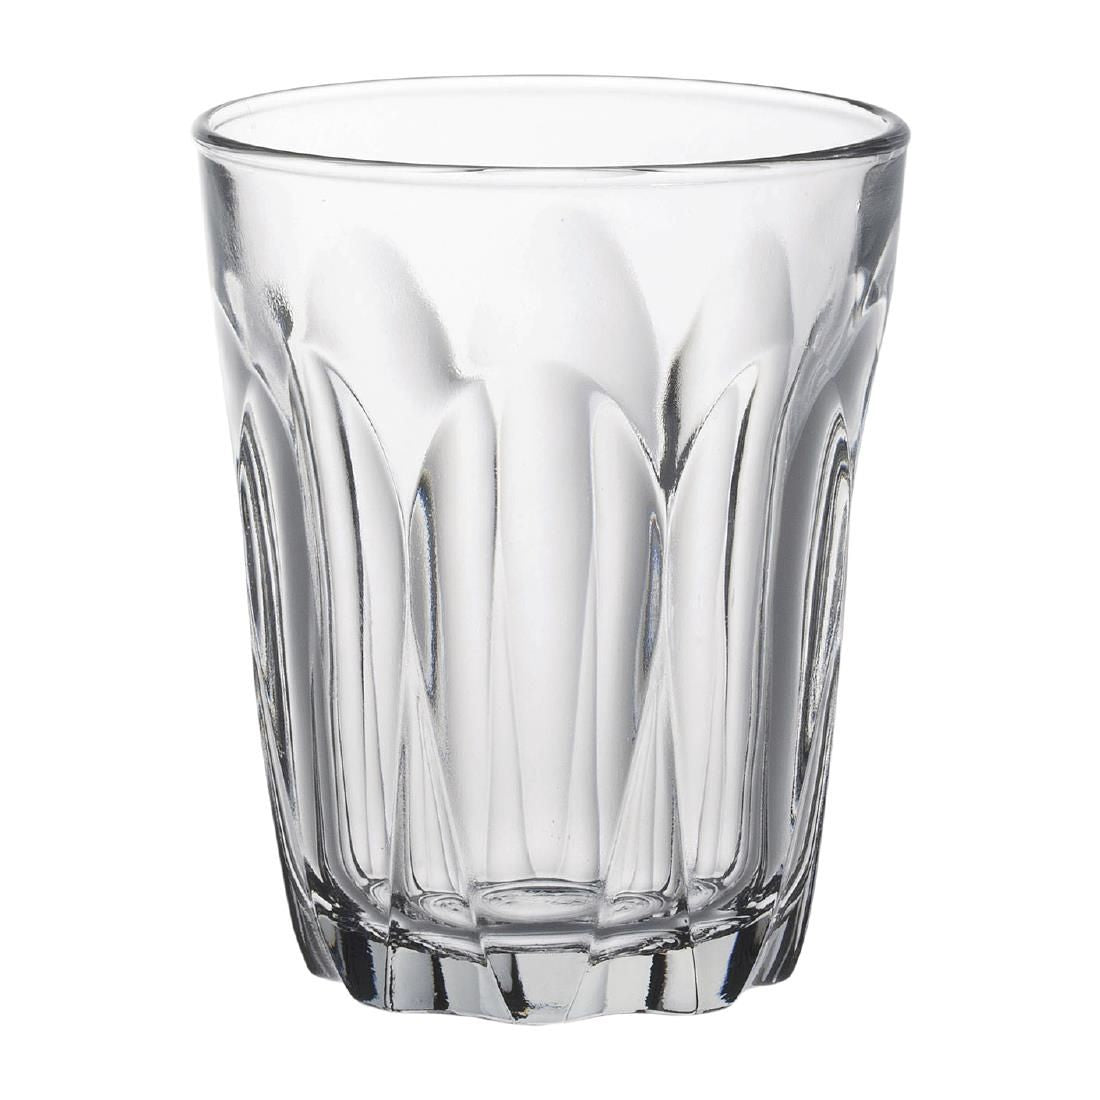 Duralex Provence Tumblers 160ml (Pack of 6) JD Catering Equipment Solutions Ltd